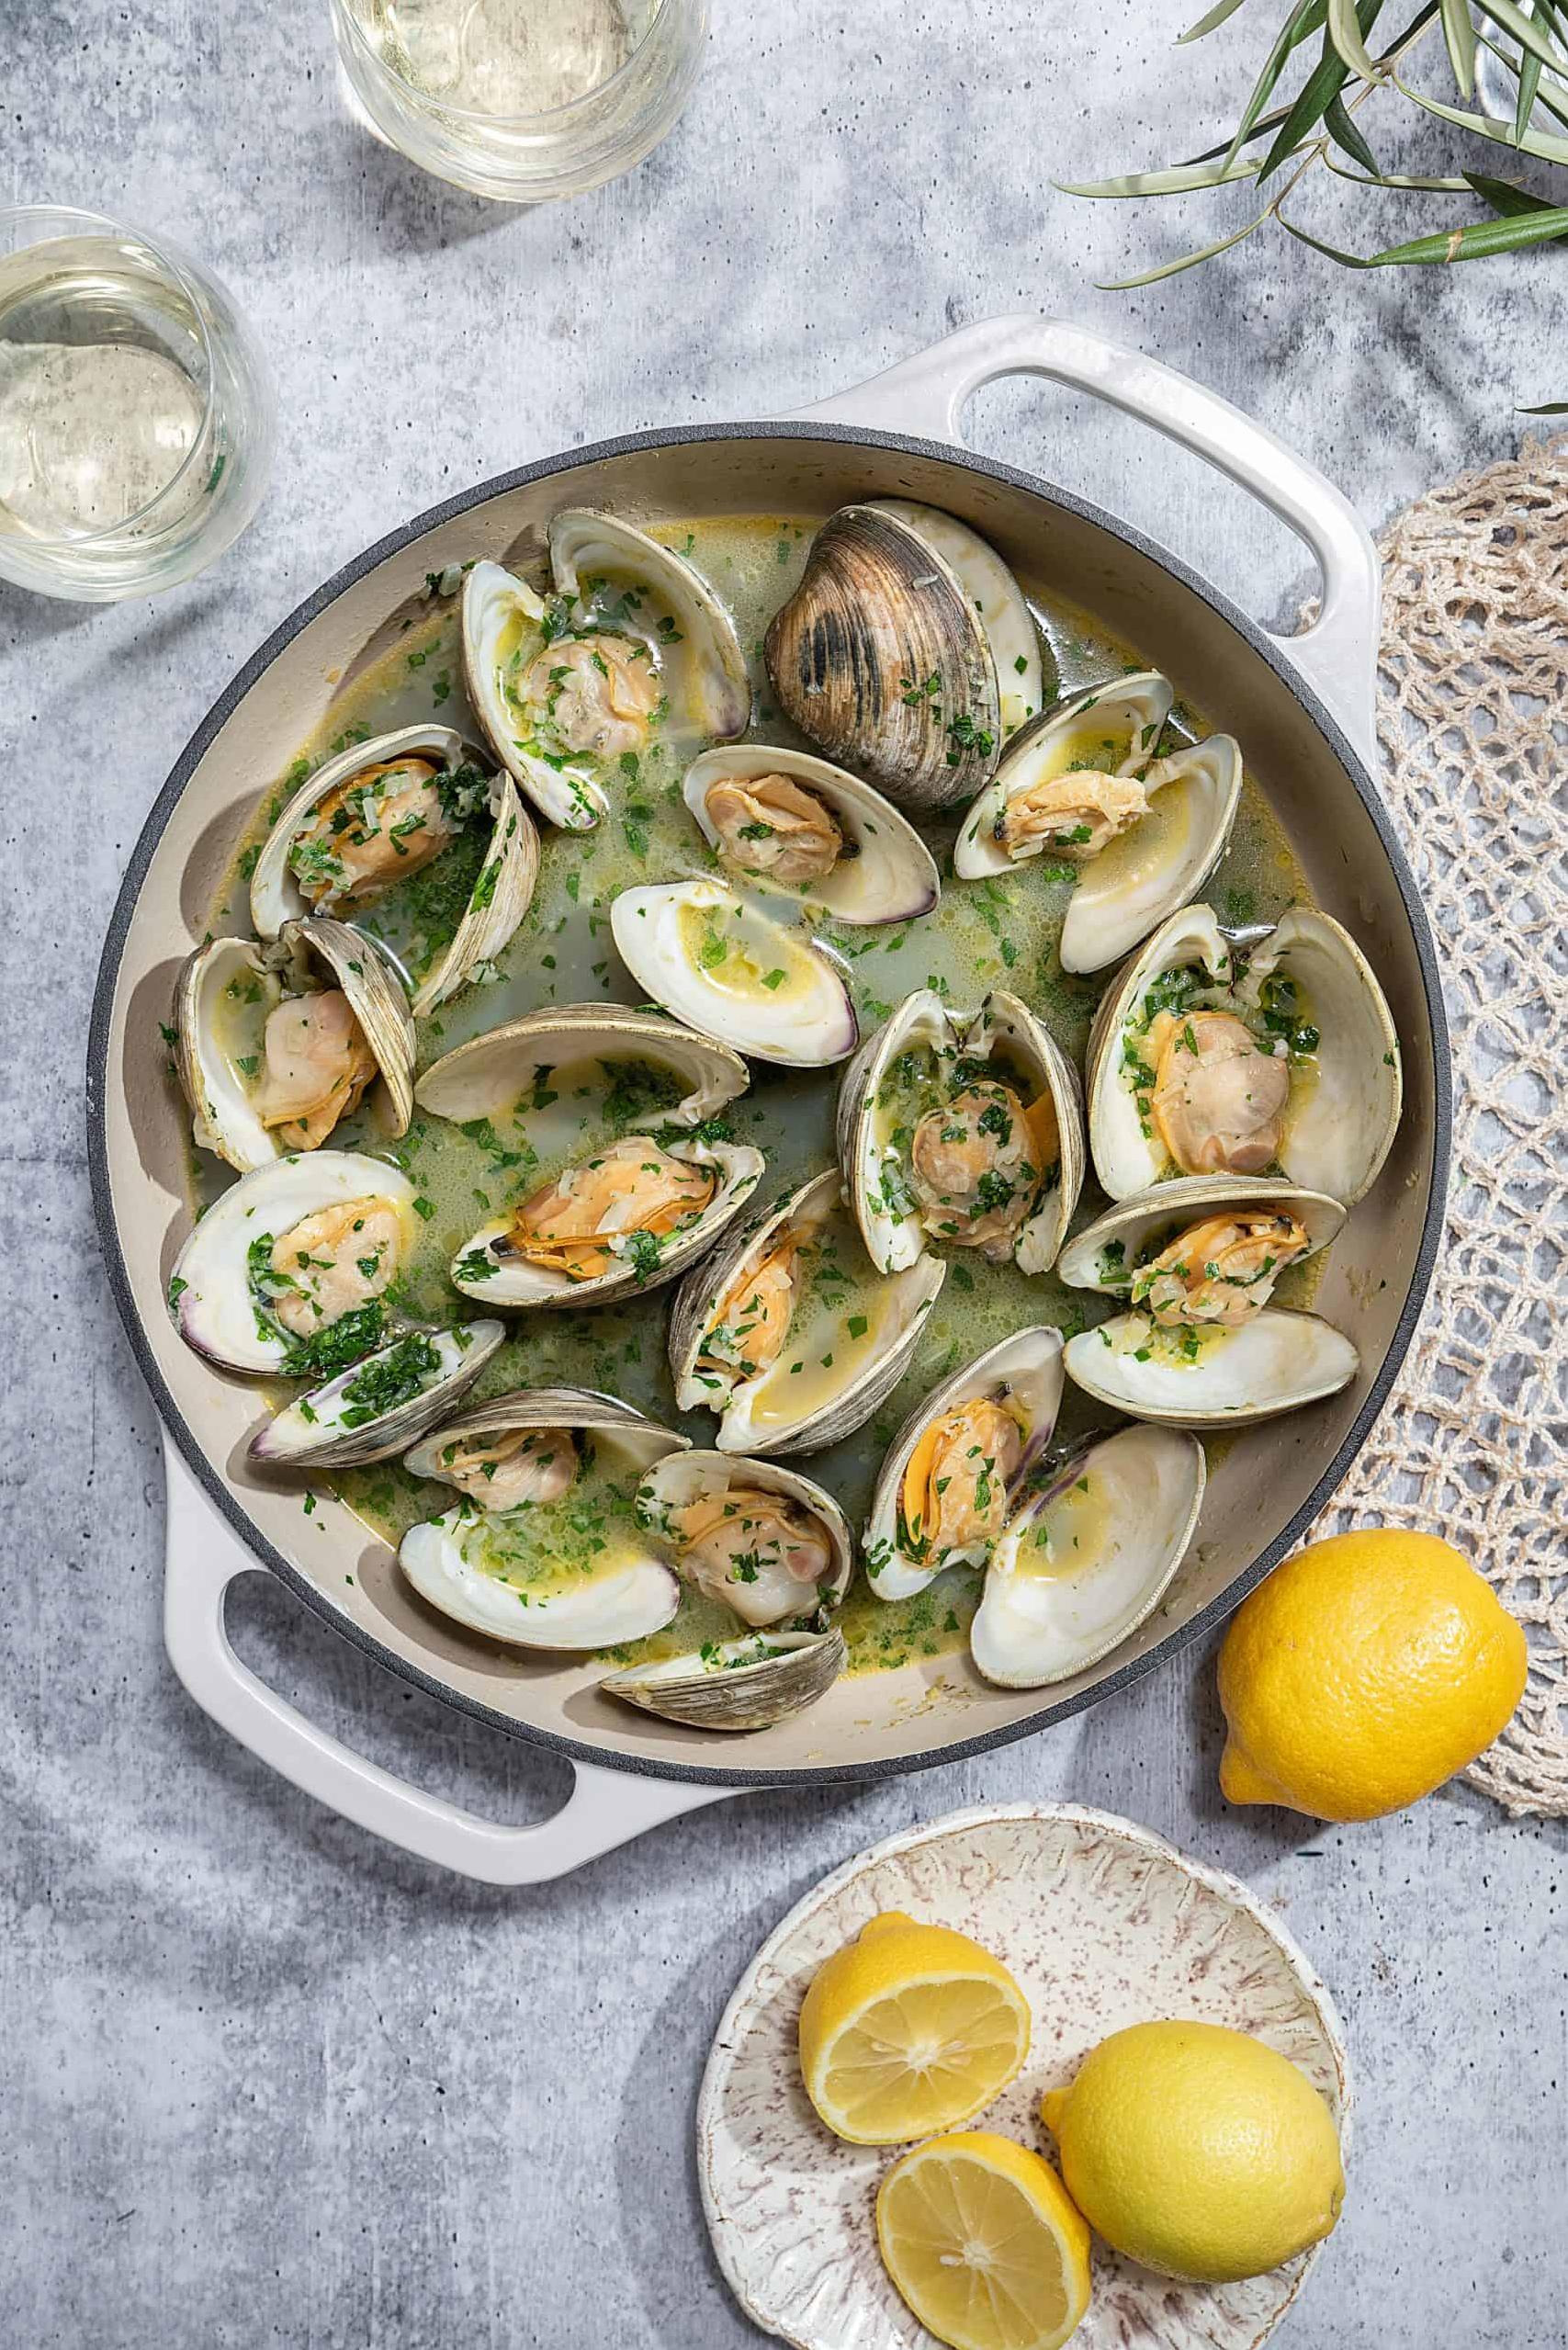  These clams bathed in a white wine sauce are the stars of the show.